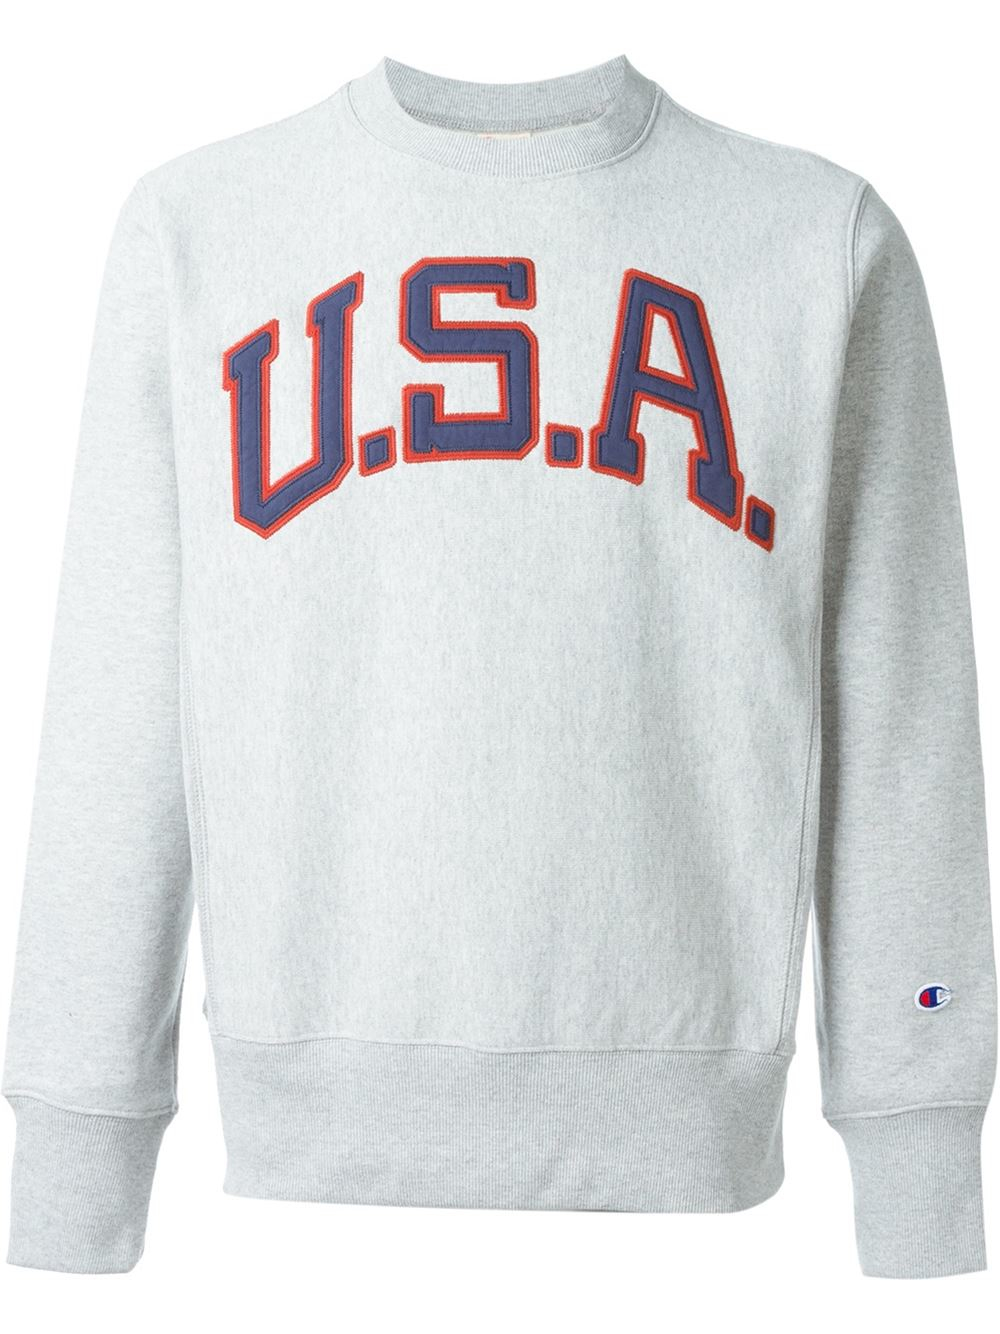 Lyst - Champion Embroidered Usa Patch Sweatshirt in Gray for Men